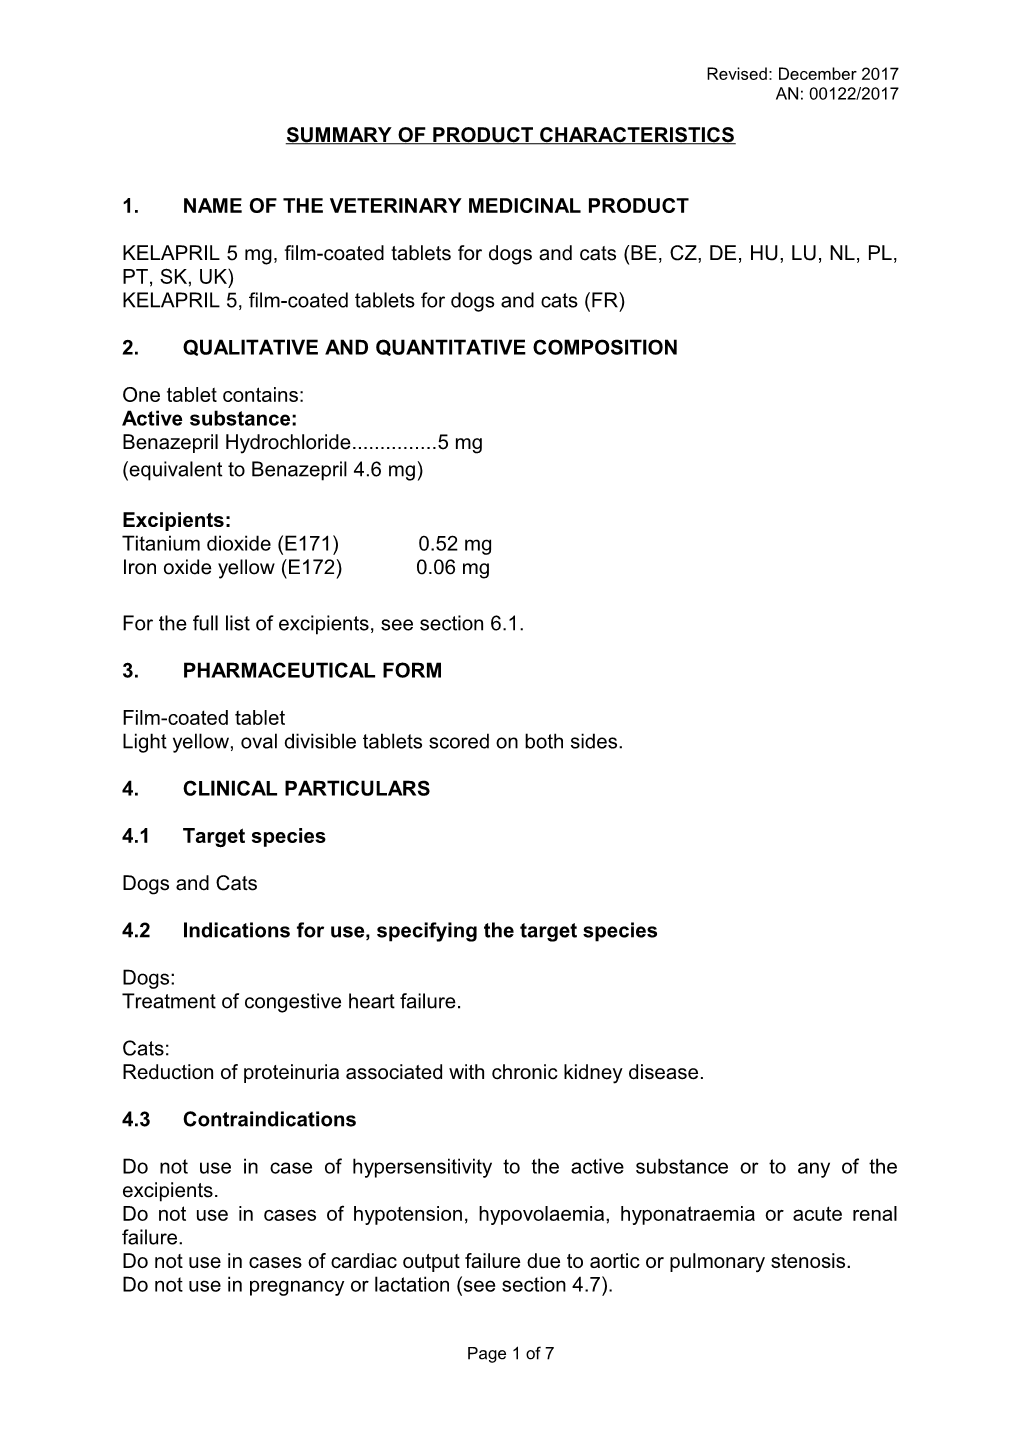 1. Name of the Veterinary Medicinal Product s56